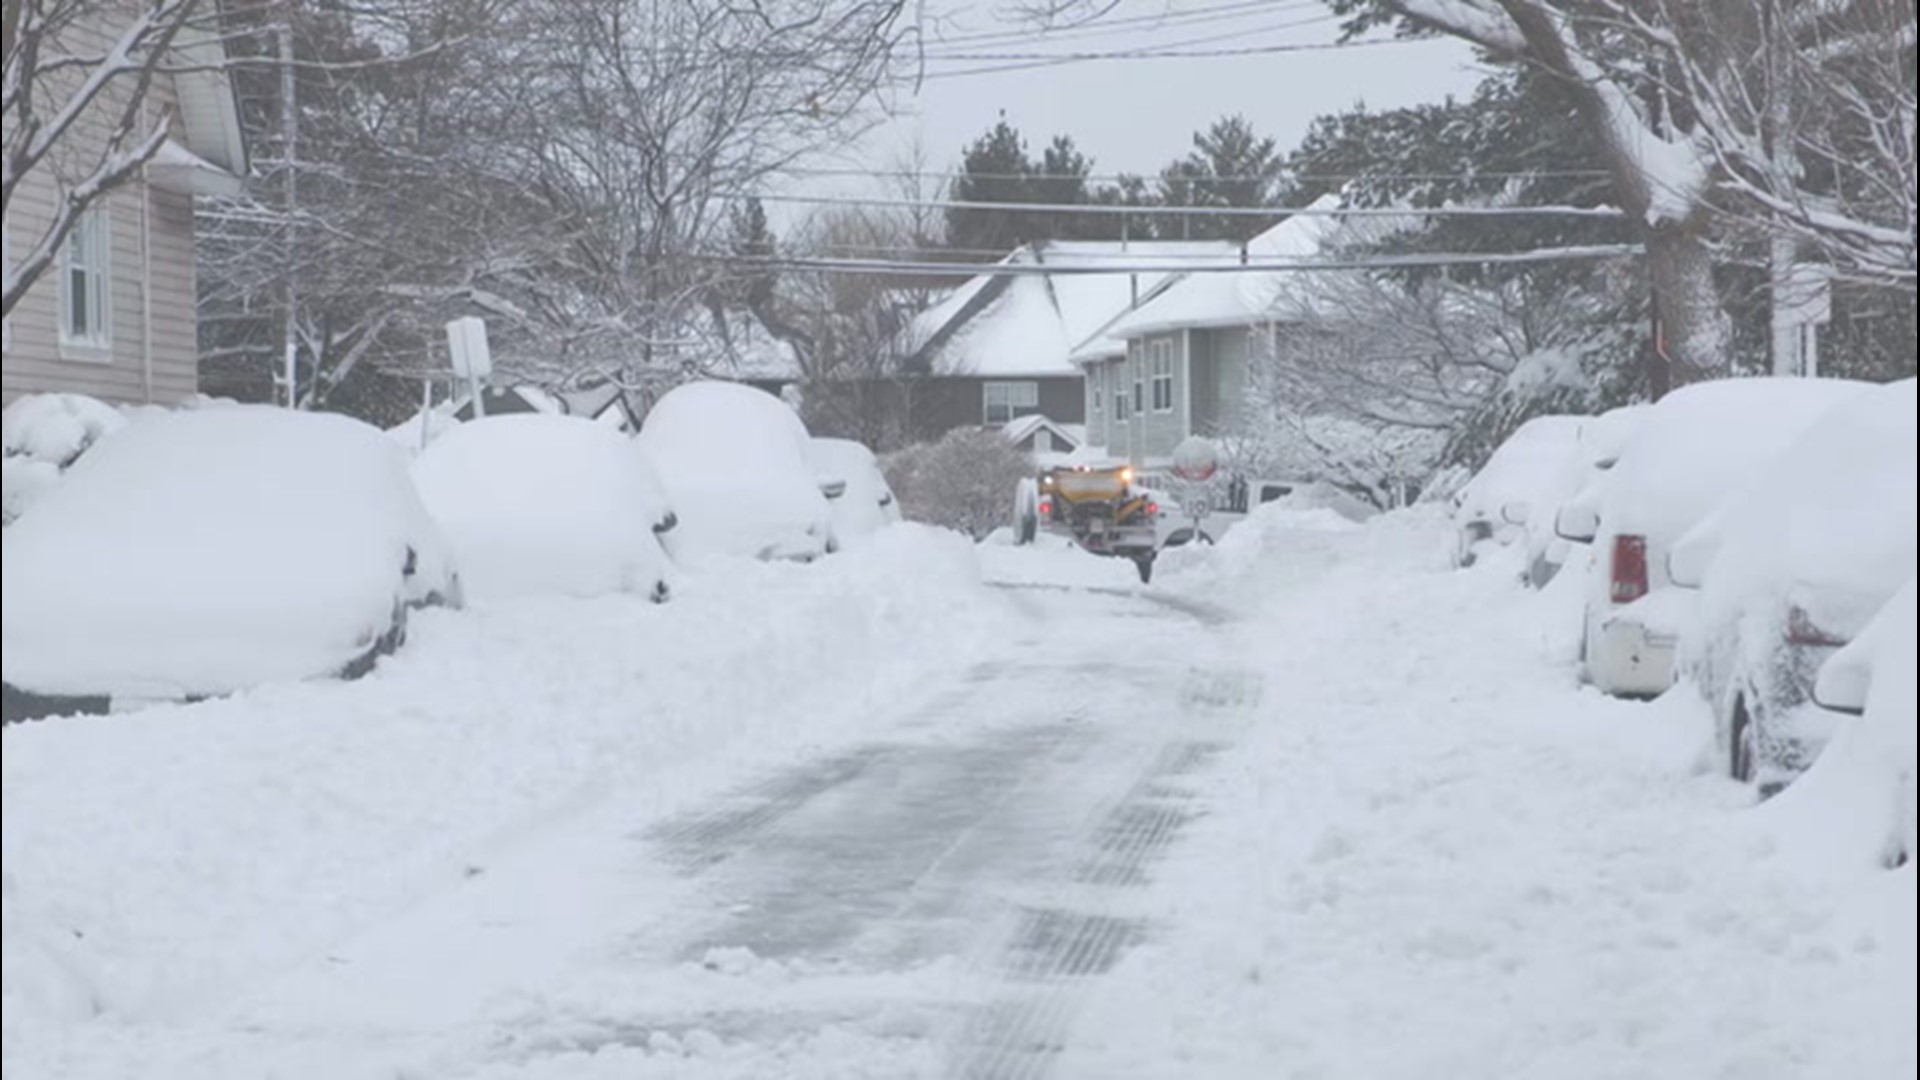 Portions of northern New Jersey received anywhere from around 16 to 30 inches after a heavy snowstorm passed through the area Monday into Tuesday.